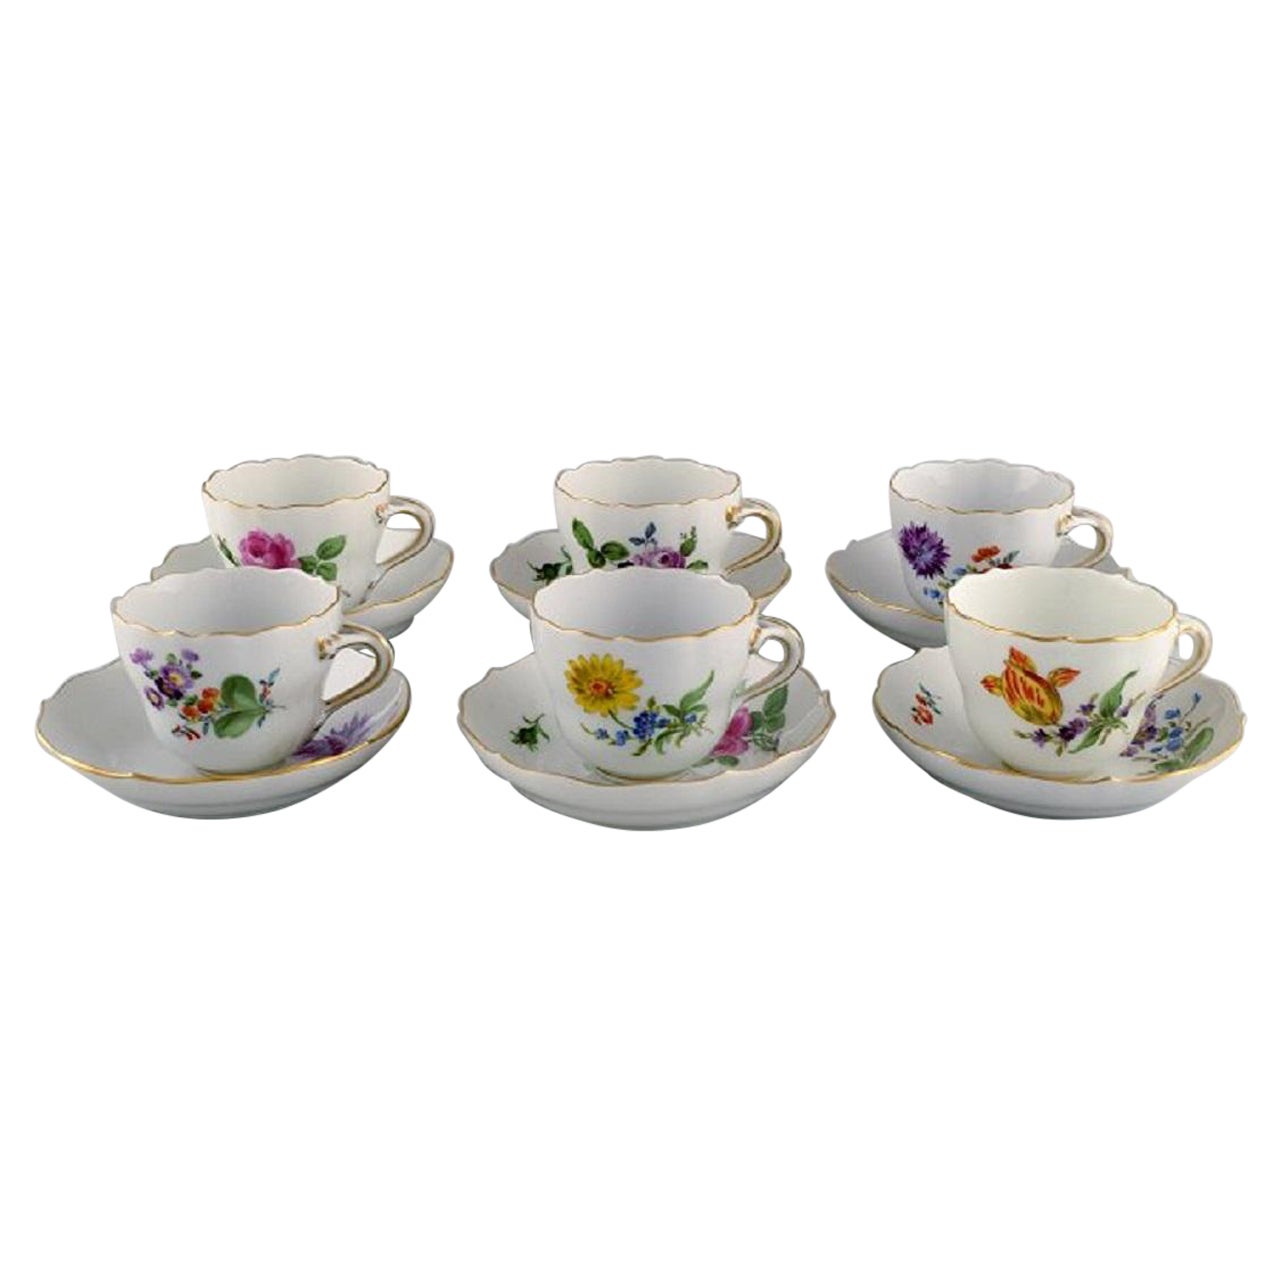 Six Meissen coffee cups with saucers in hand-painted porcelain.